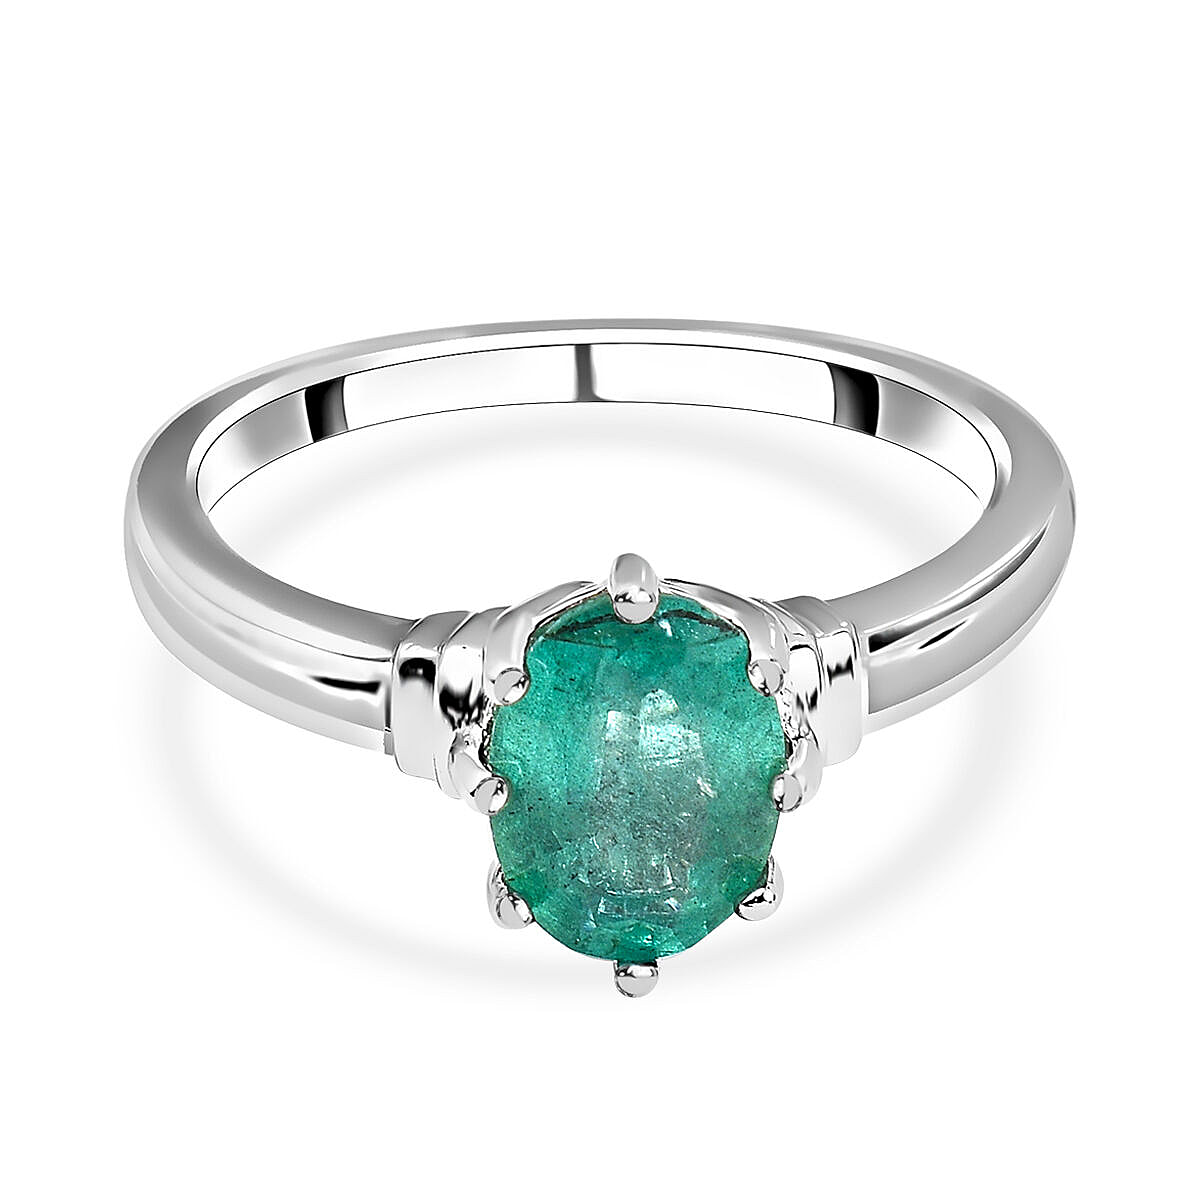 Gemfields Zambian Emerald Solitaire Ring in Rhodium Overlay Sterling Silver  1.20 Ct.